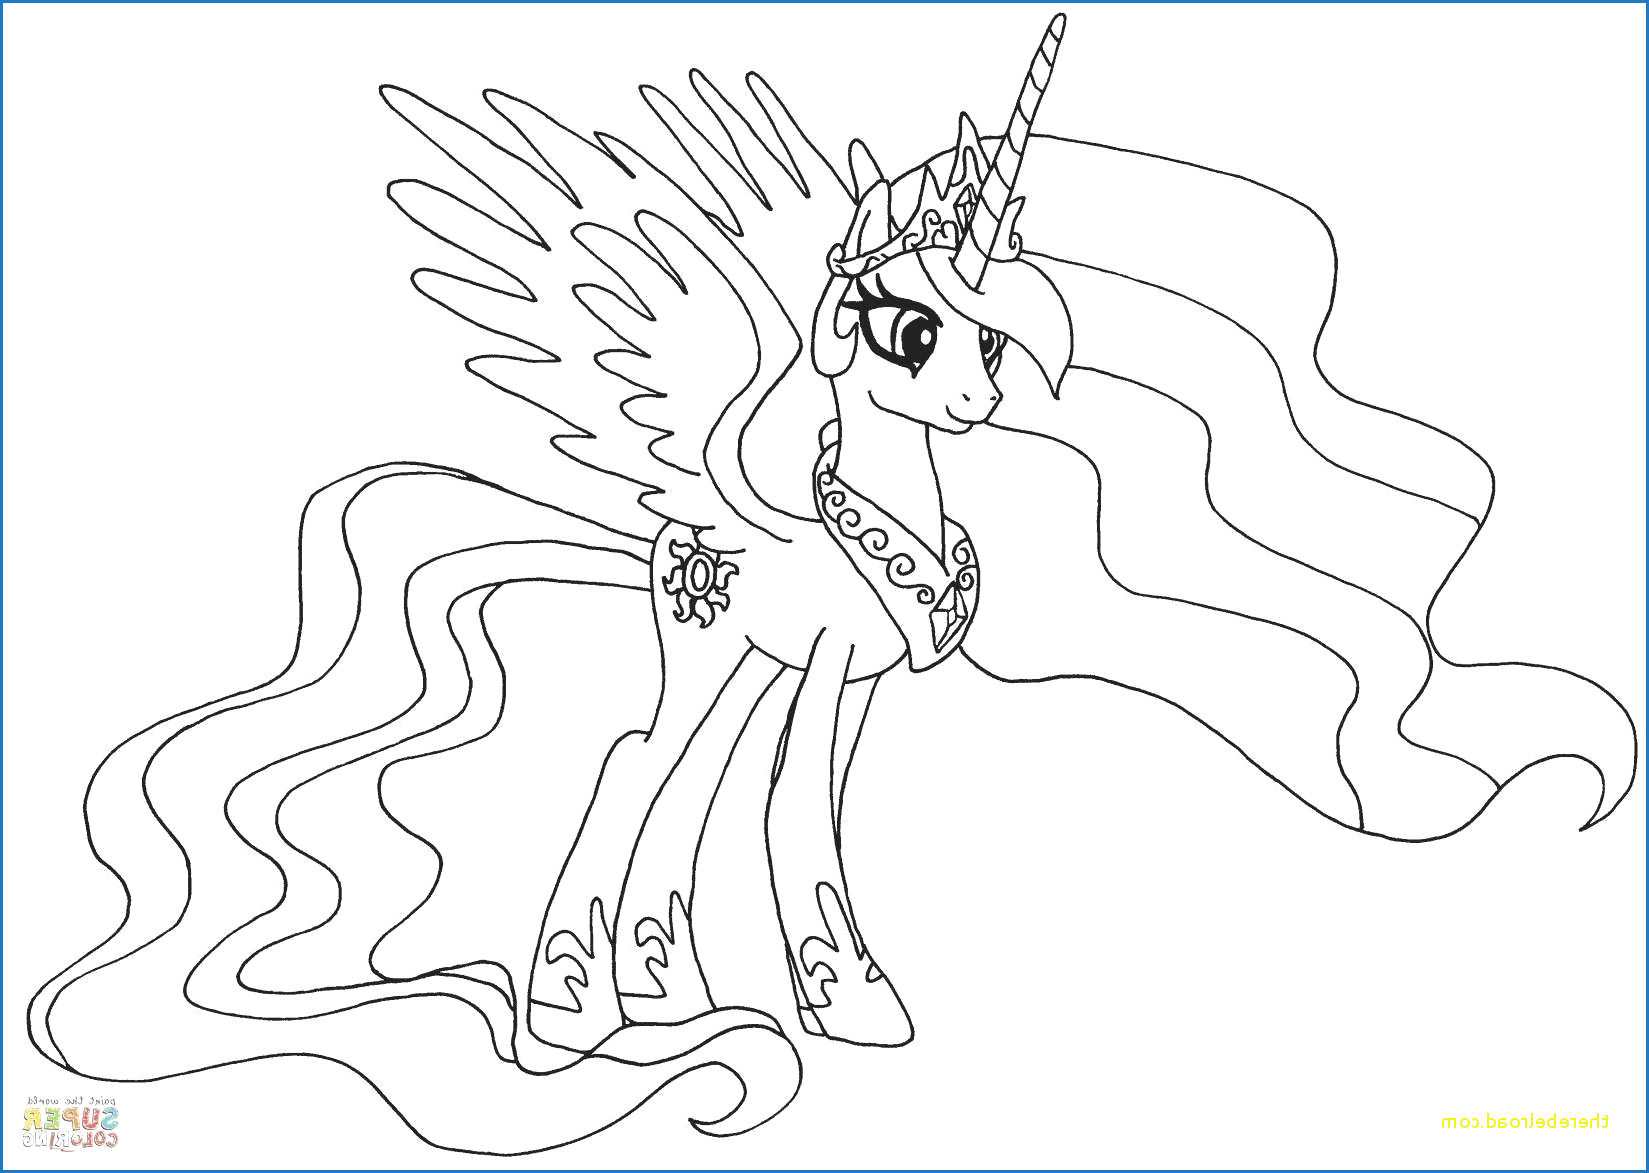 super why coloring book luxury image best my little pony coloring pages fvgiment of super why coloring book jpg